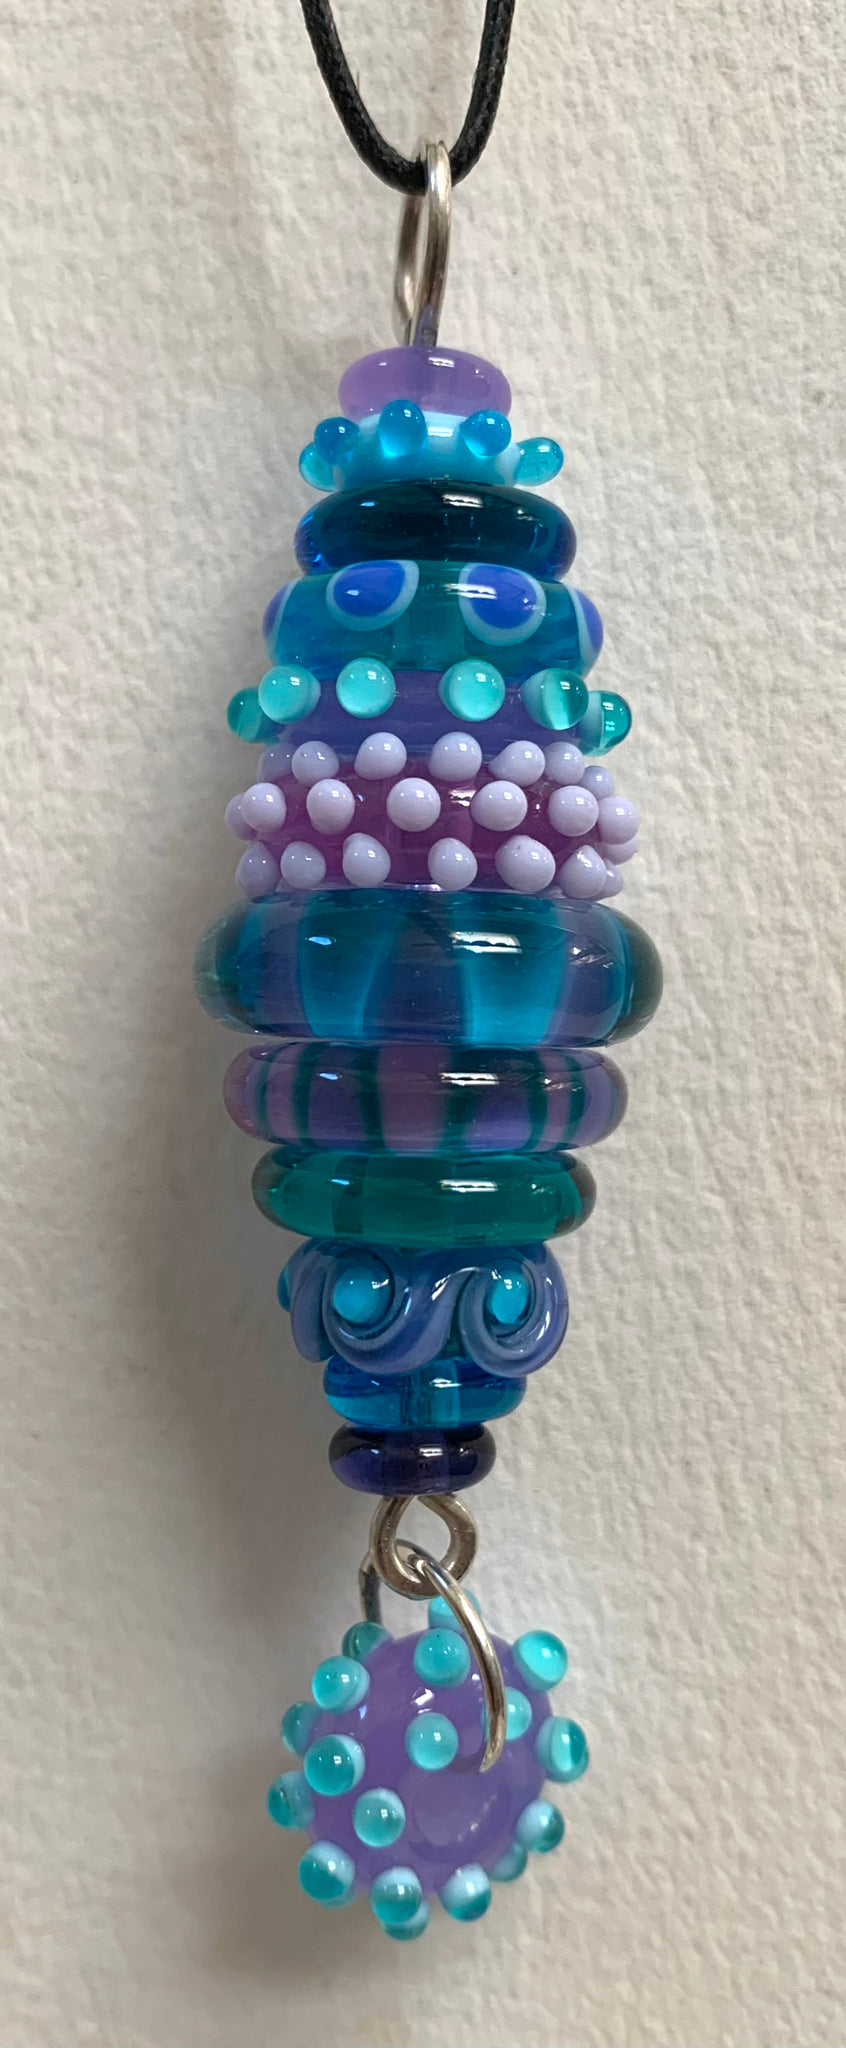 Lavender teal stacked bead pendant